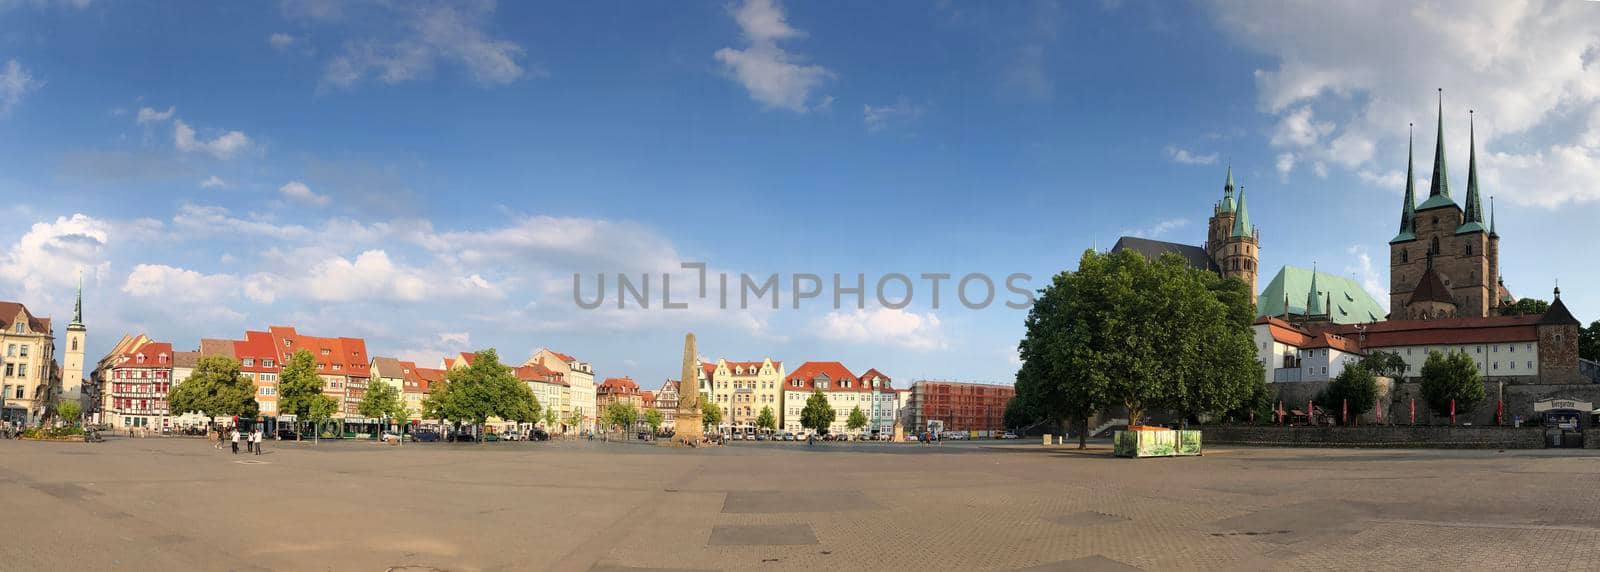 Panorama from the Domplatz Erfurt in Germany